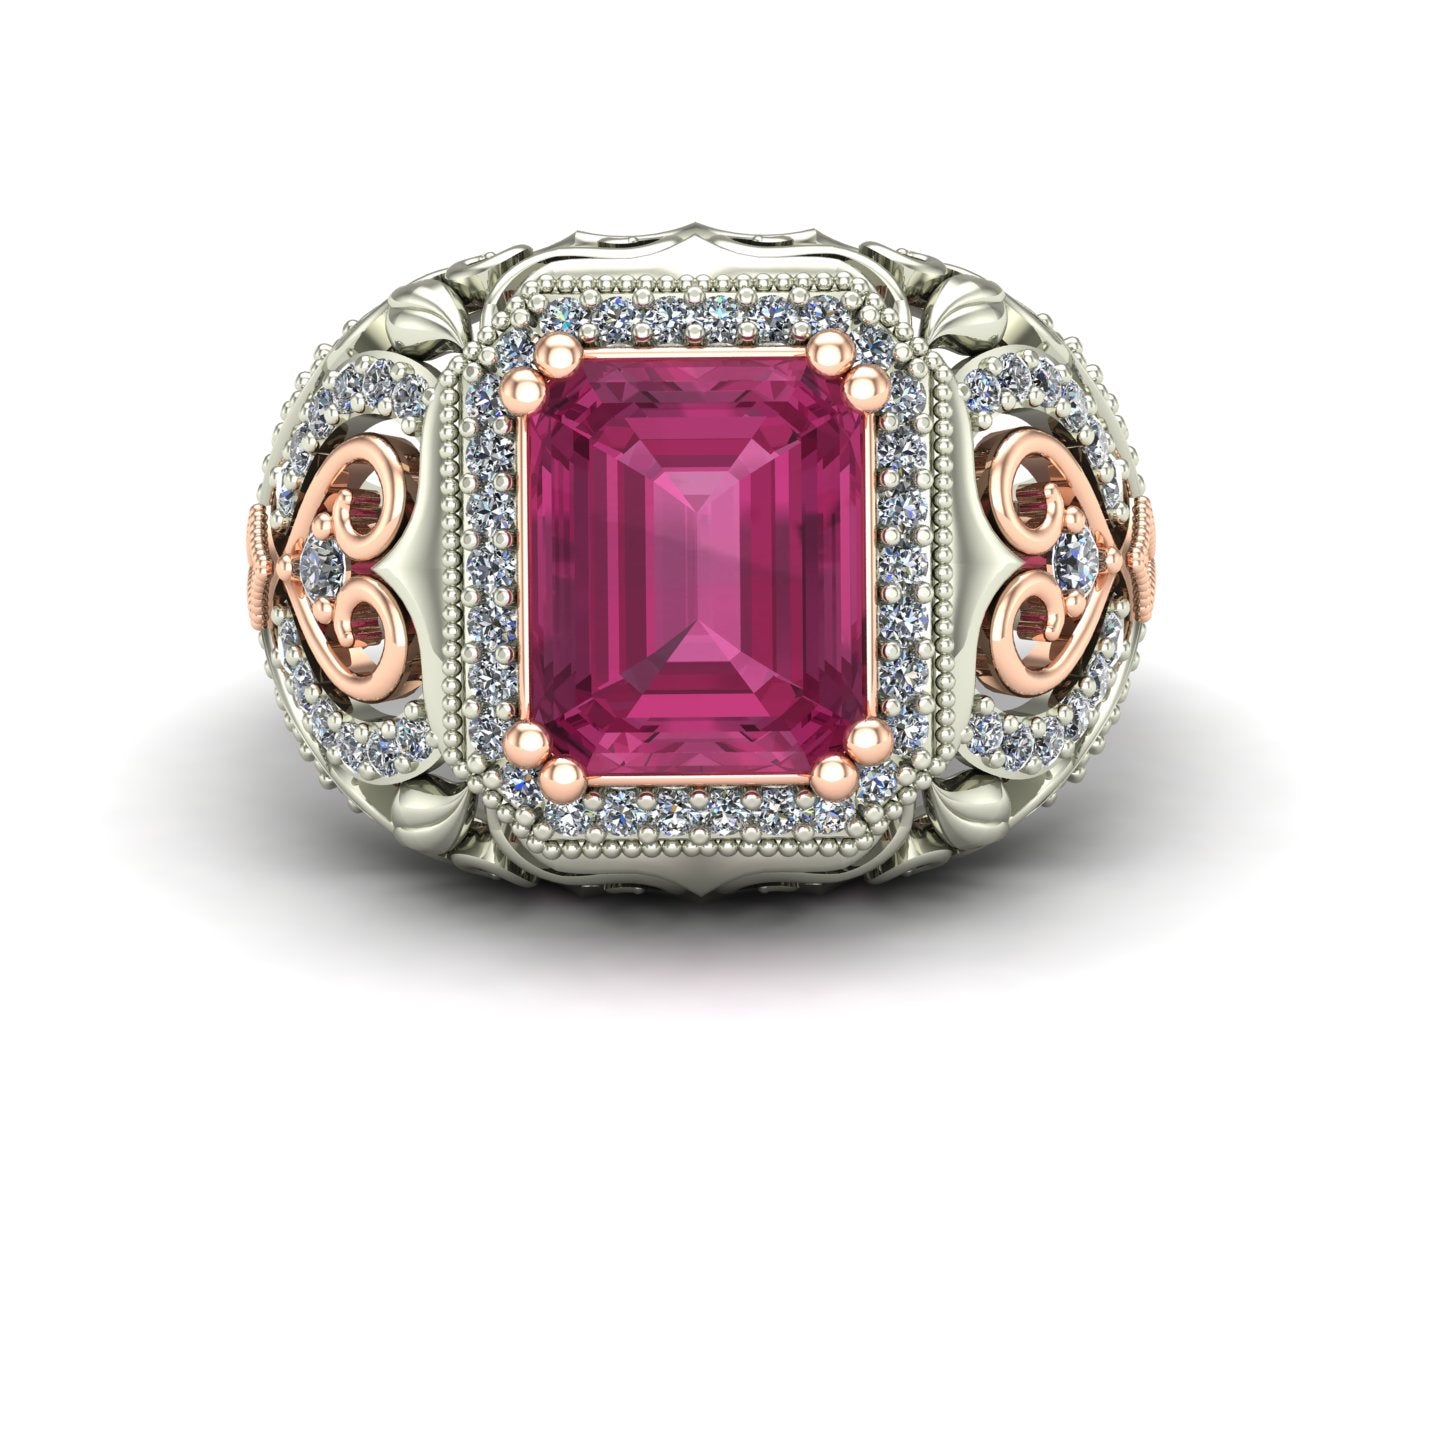 emerald cut pink tourmaline and diamond two tone dome ring in 14k rose and white gold - Charles Babb Designs - top view